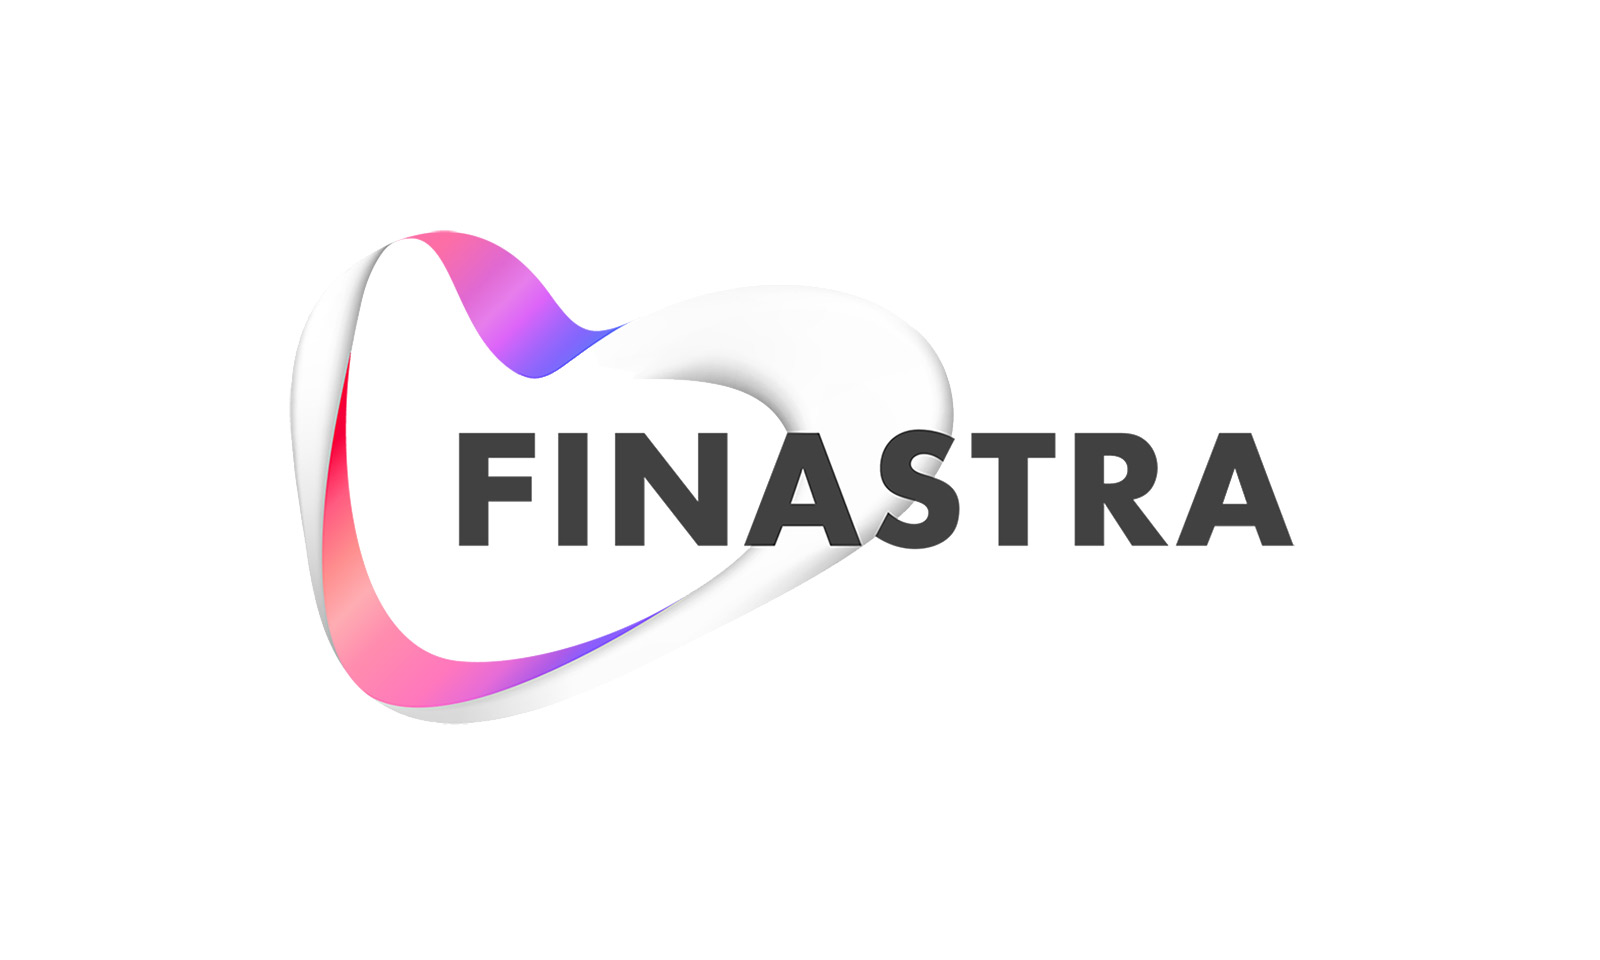 appsec-case-study-bringing-world-class-security-to-finastra-s-app-ecosystem-synopsys